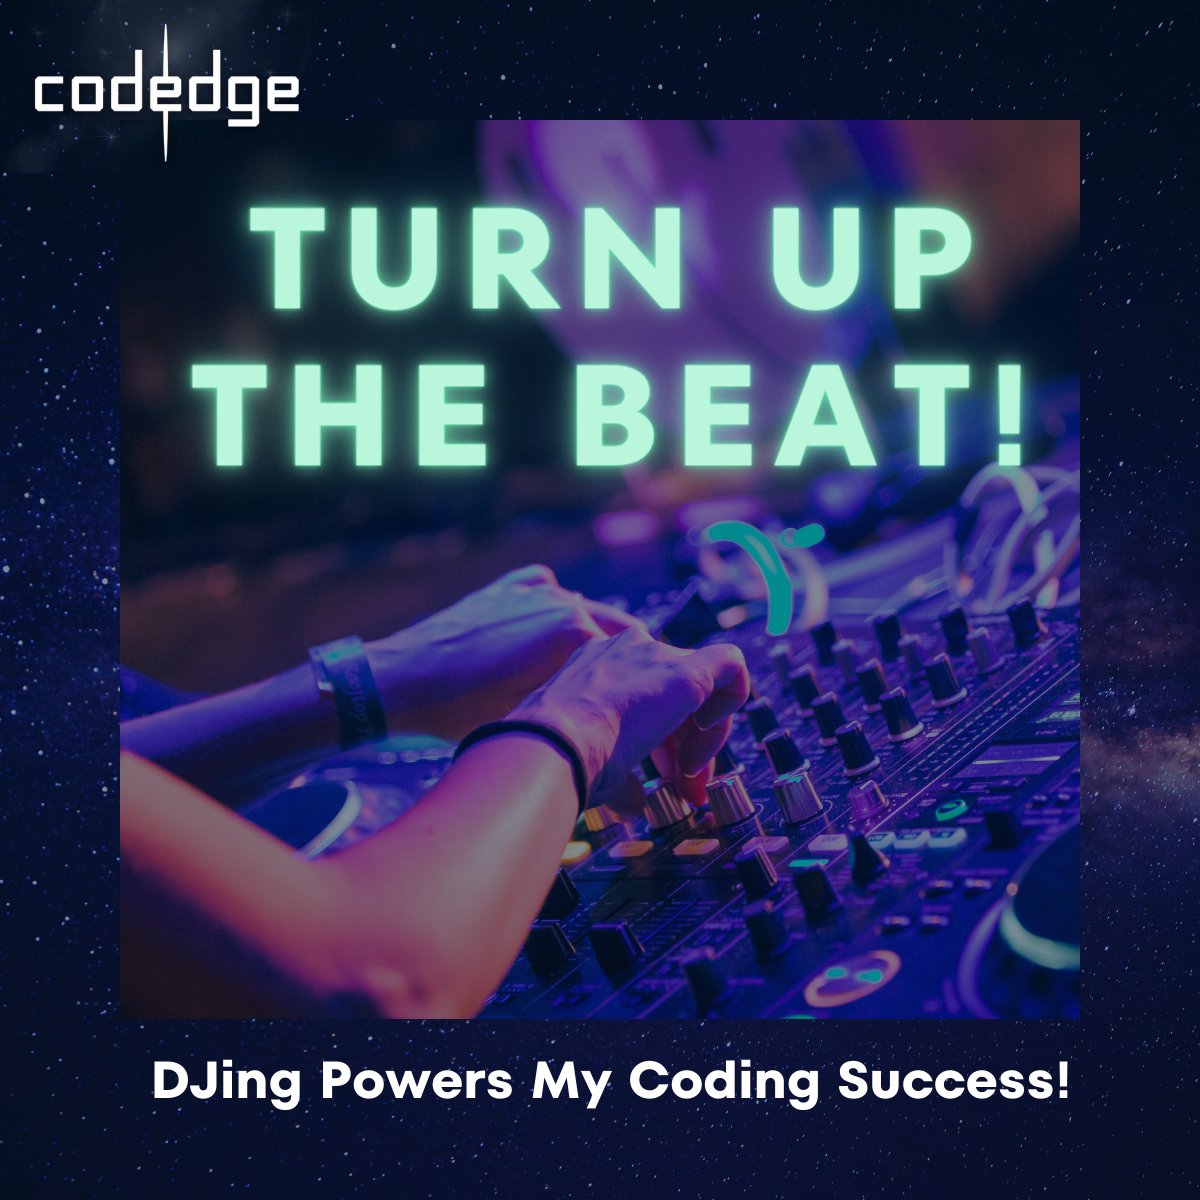 🚀 Harnessing the energy of hardstyle and speedcore to write cleaner, faster code. Who else finds inspiration in their hobbies? #CodingPassion #RaveCoding